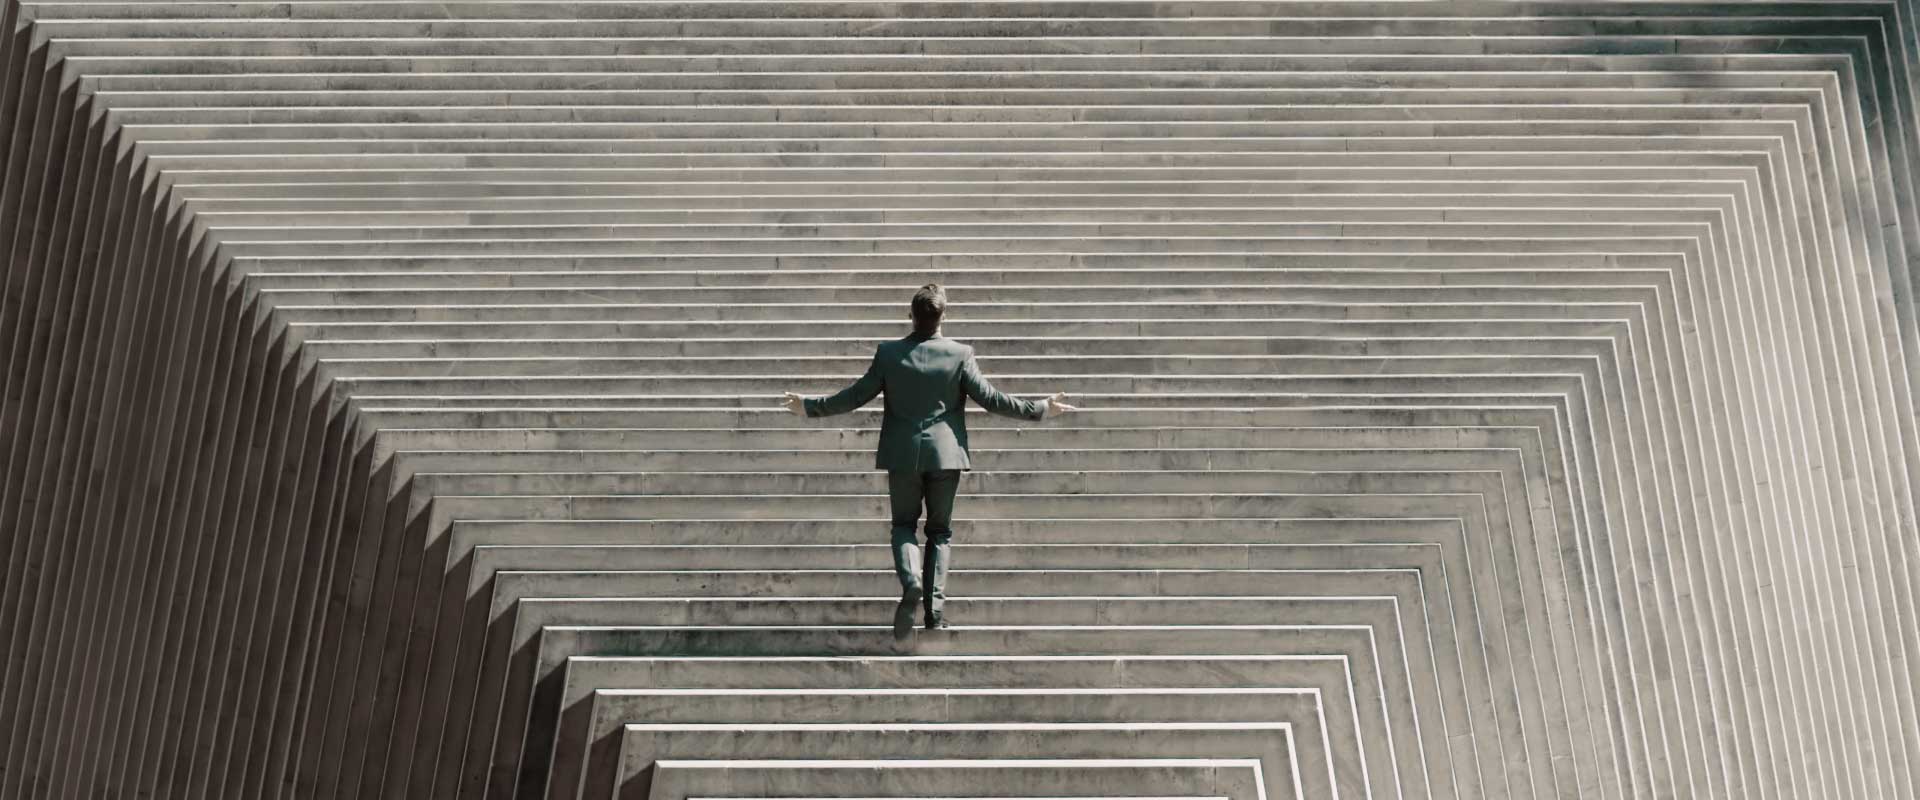 Men and stairs. Still from Lexus LX2016 Commercial.